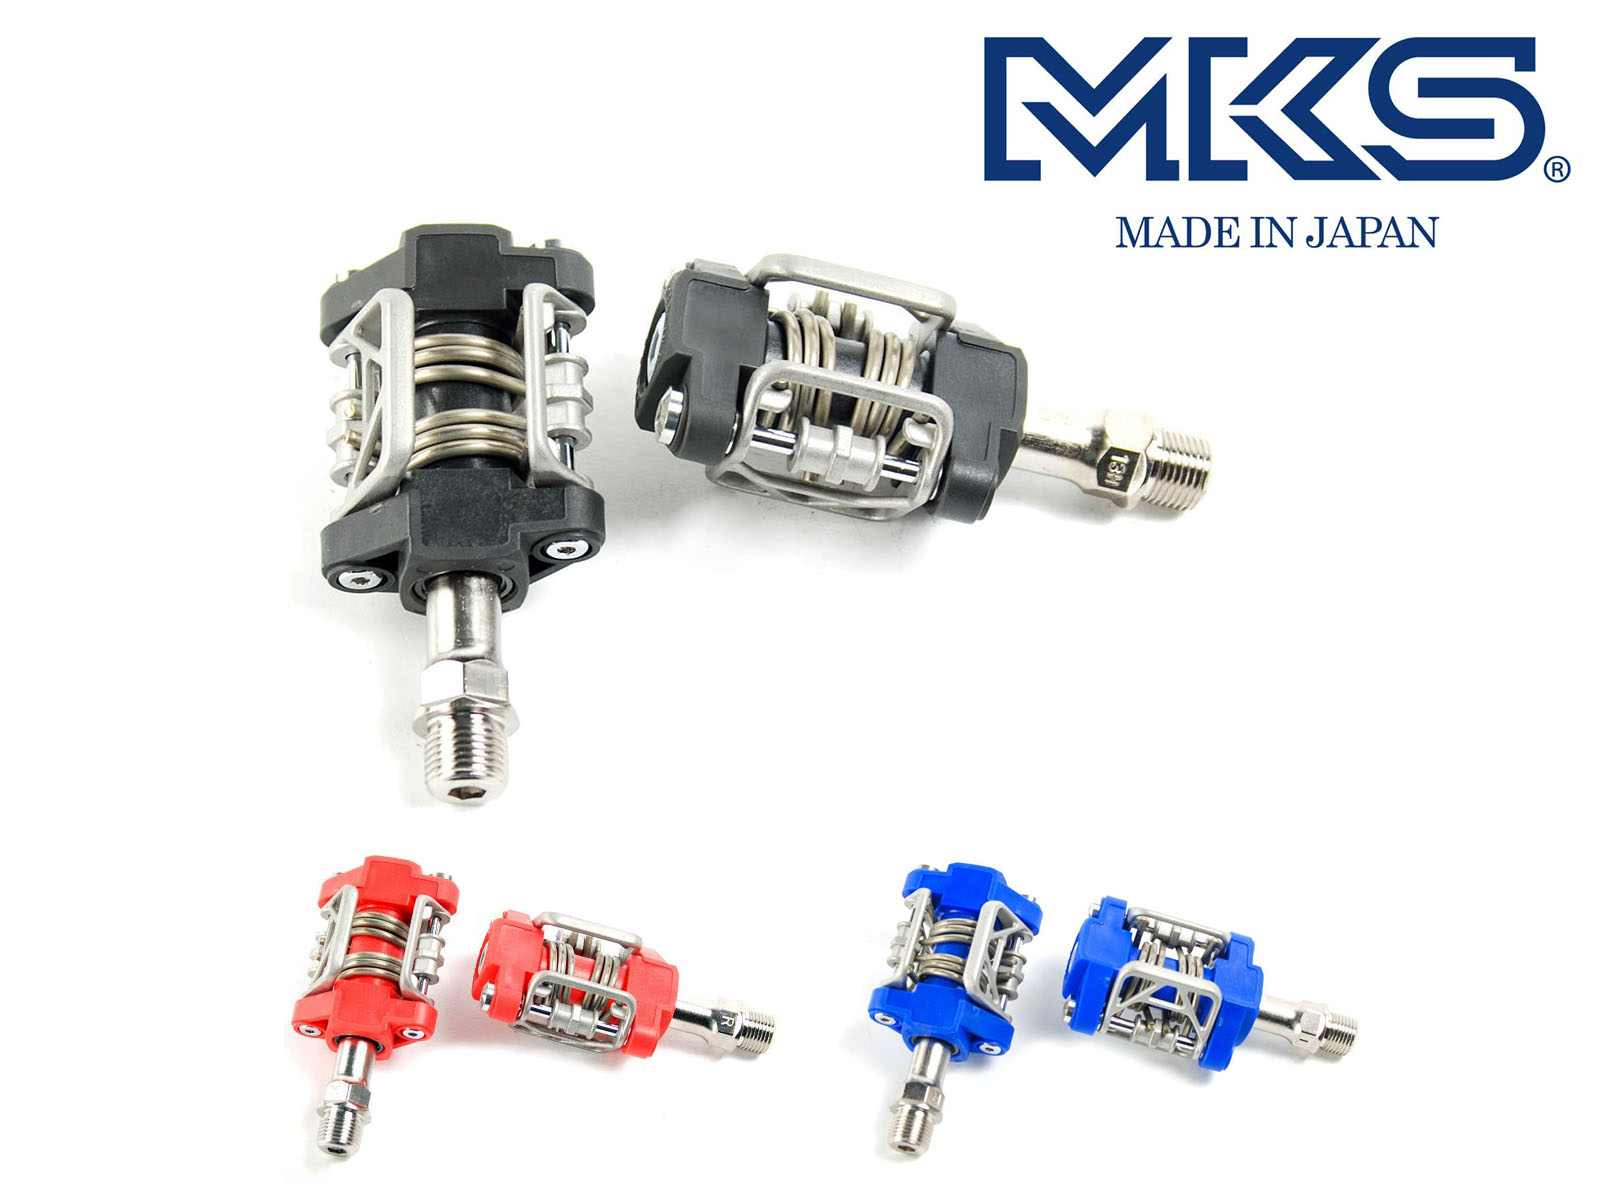 MKS US-B MTB Clipless Pedals - Made in Japan